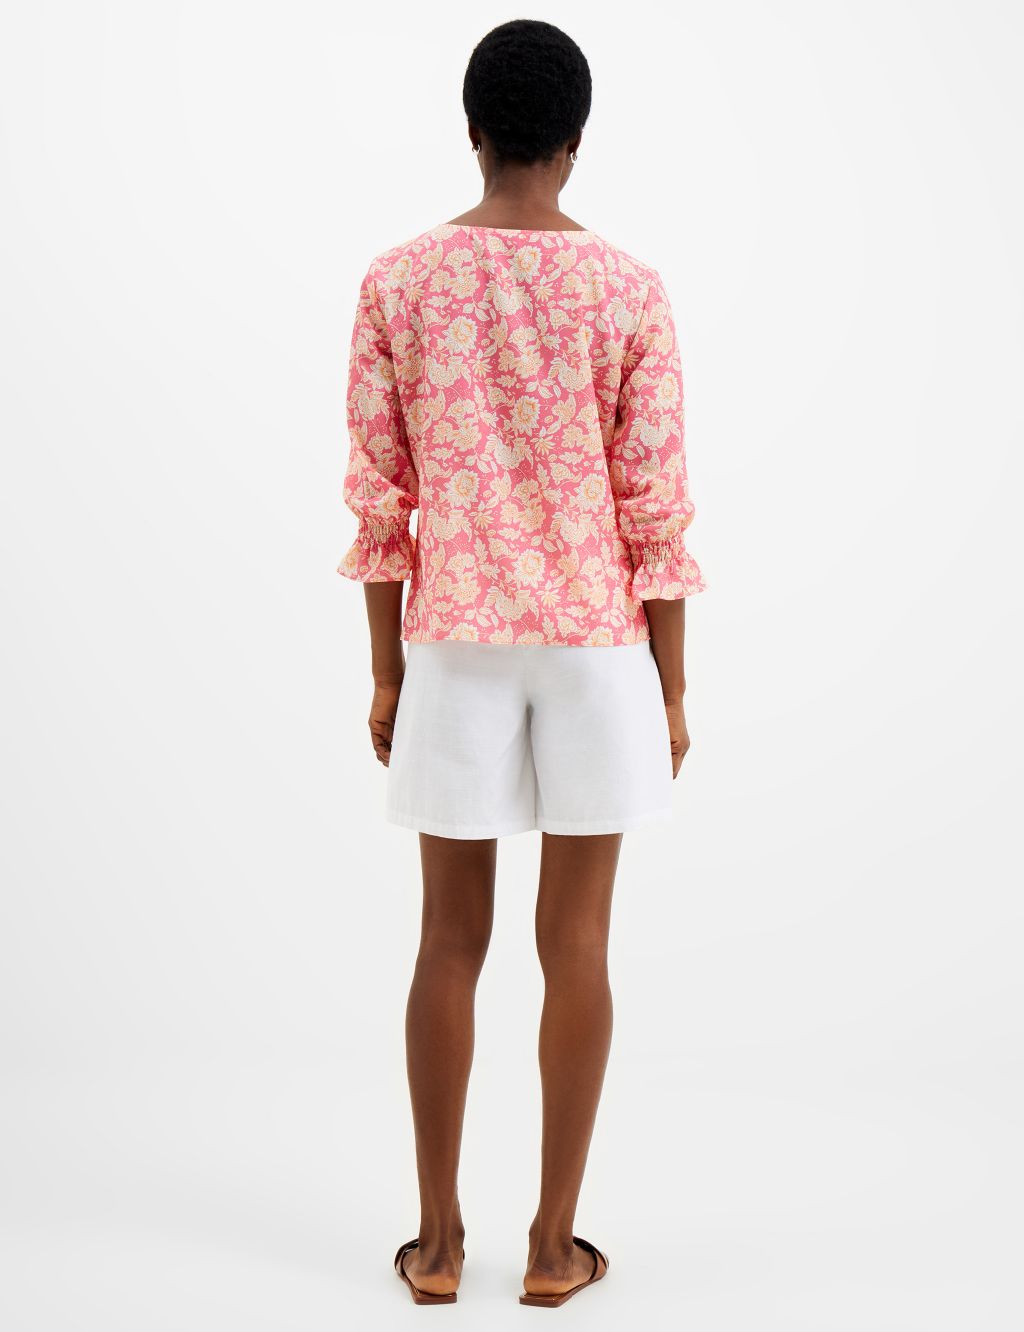 Crepe Floral Shell Top image 3